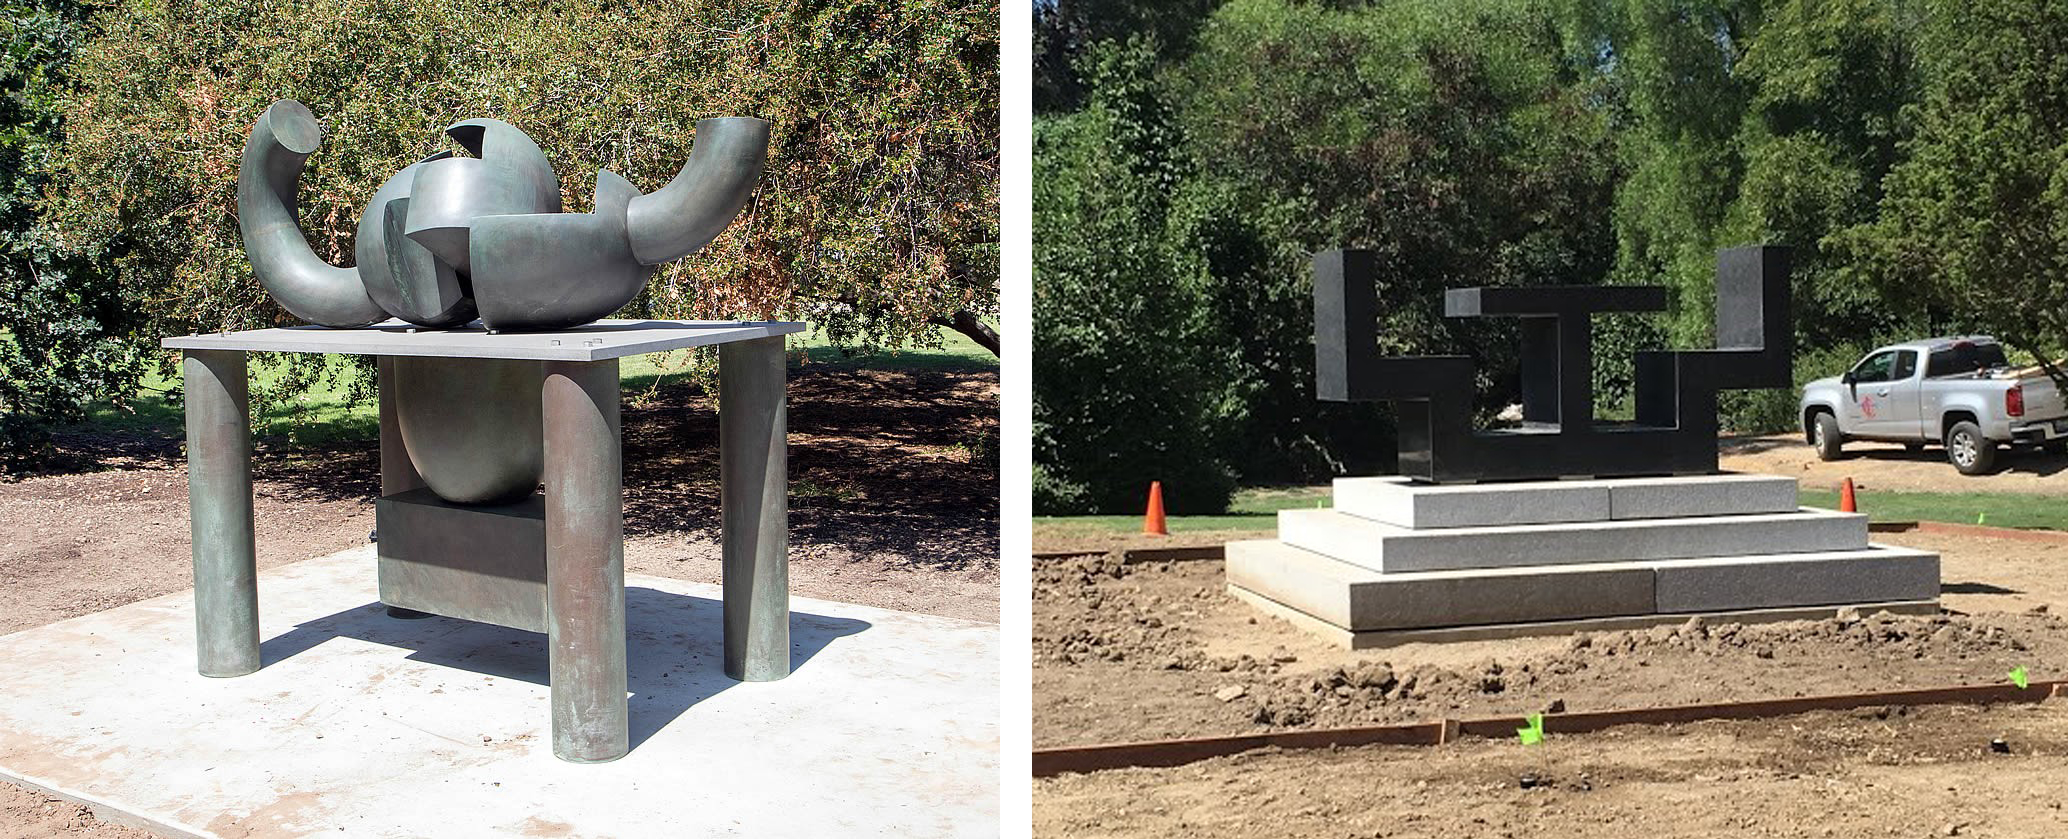 Left: Installation photograph, featuring Peter Voulkos’s Firestone (1965), in the exhibition Hide and Seek: Art Meets Nature, at the South Coast Botanic Garden, © Peter Voulkos; Right: Installation photograph, featuring Richard Artschwager’s One on One (1989), in the exhibition Hide and Seek: Art Meets Nature, at the South Coast Botanic Garden, © Richard Artschwager